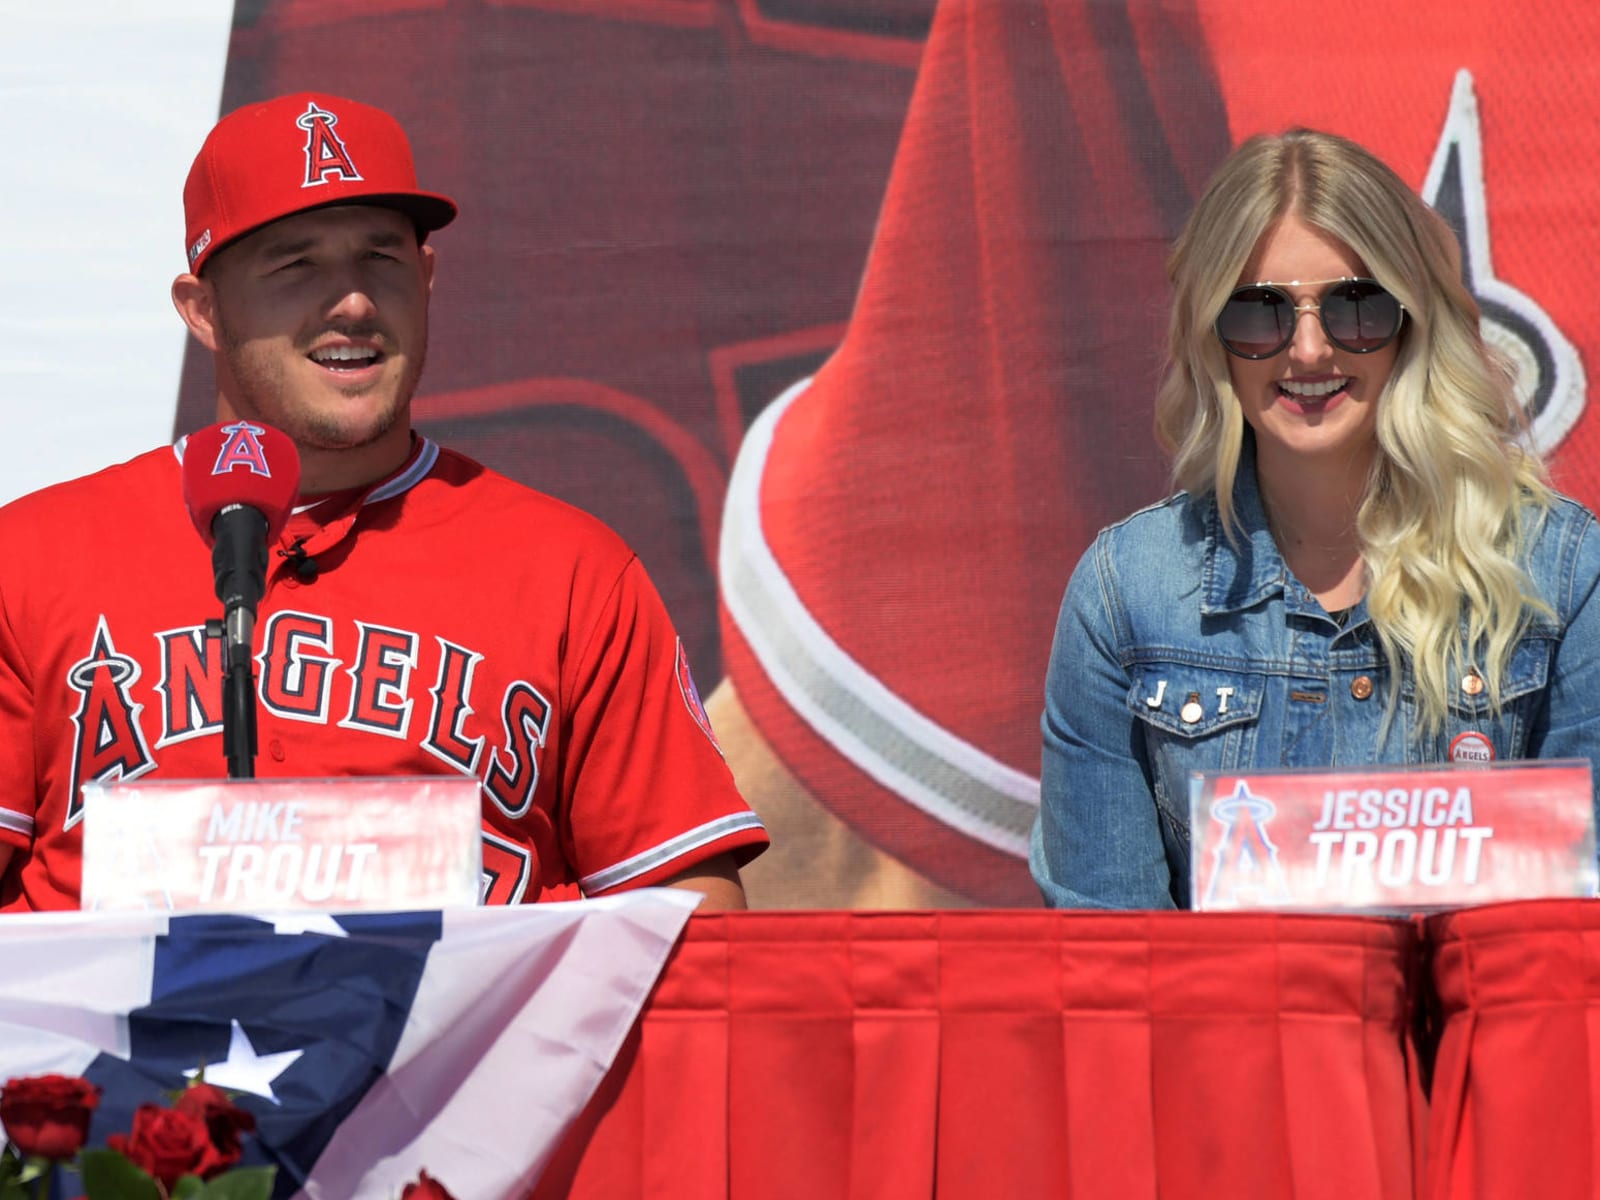 Mike Trout dedicates an adorable Instagram post to his son